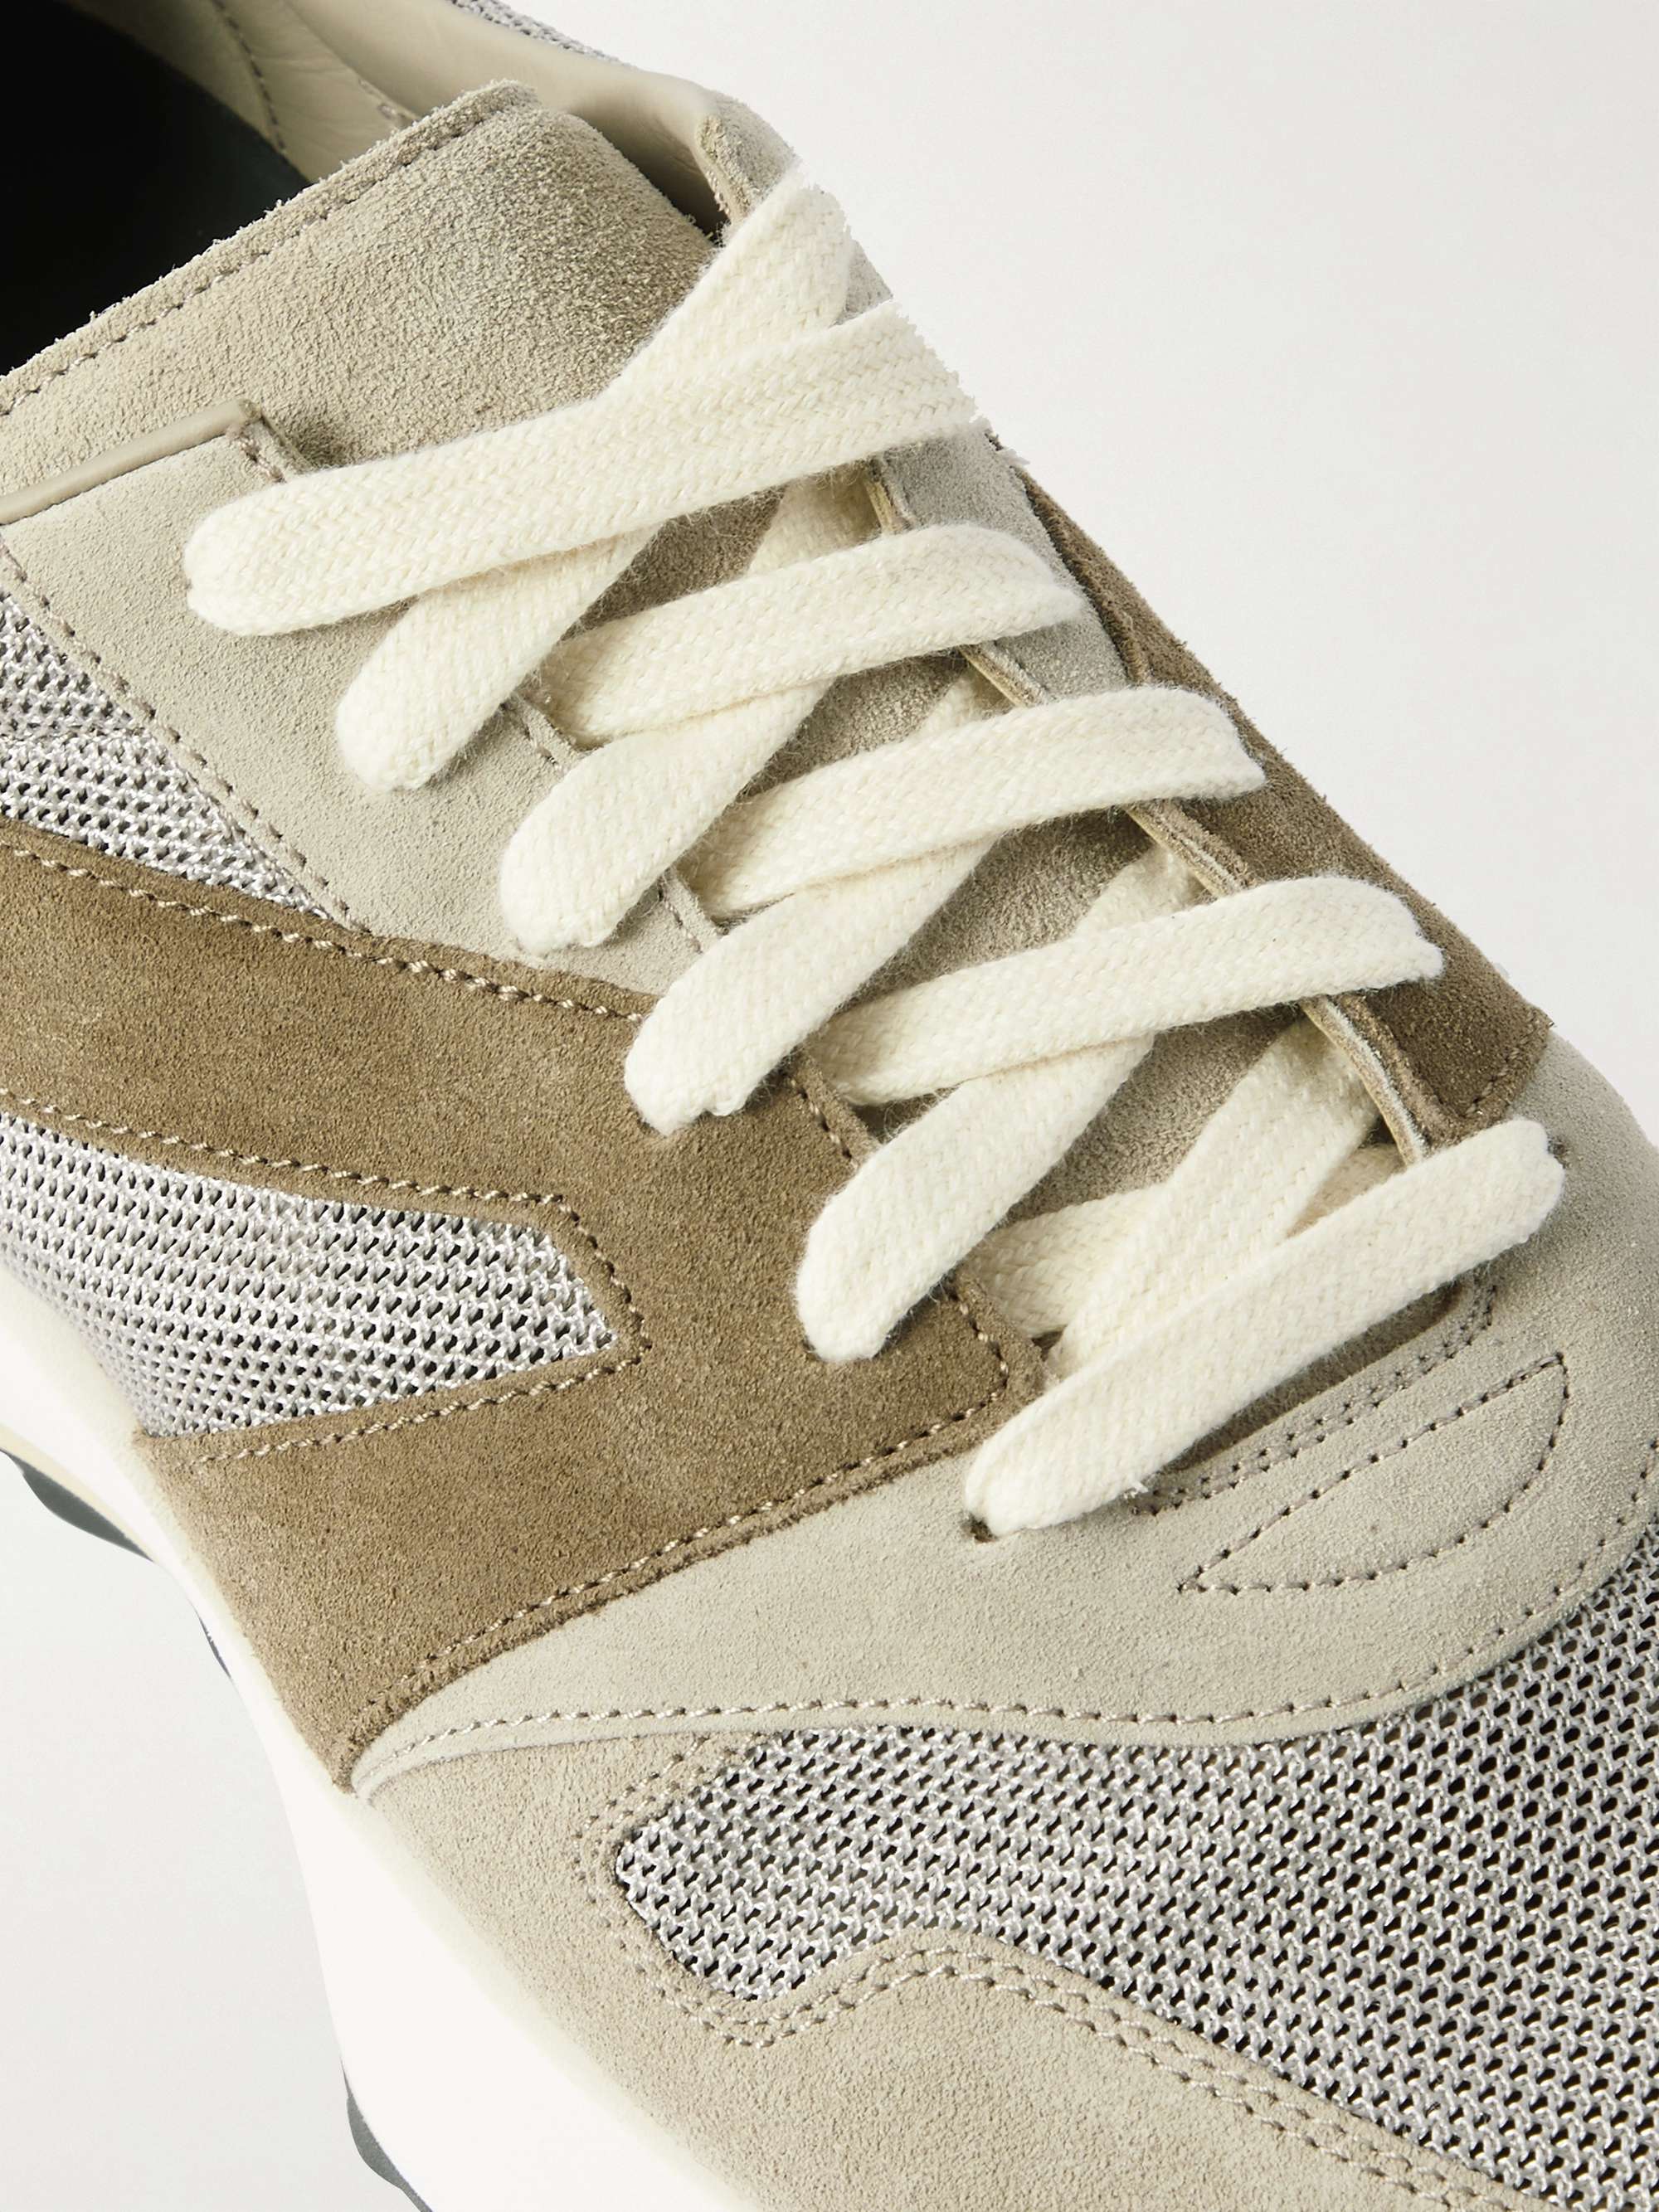 FEAR OF GOD Panelled Suede and Mesh Sneakers